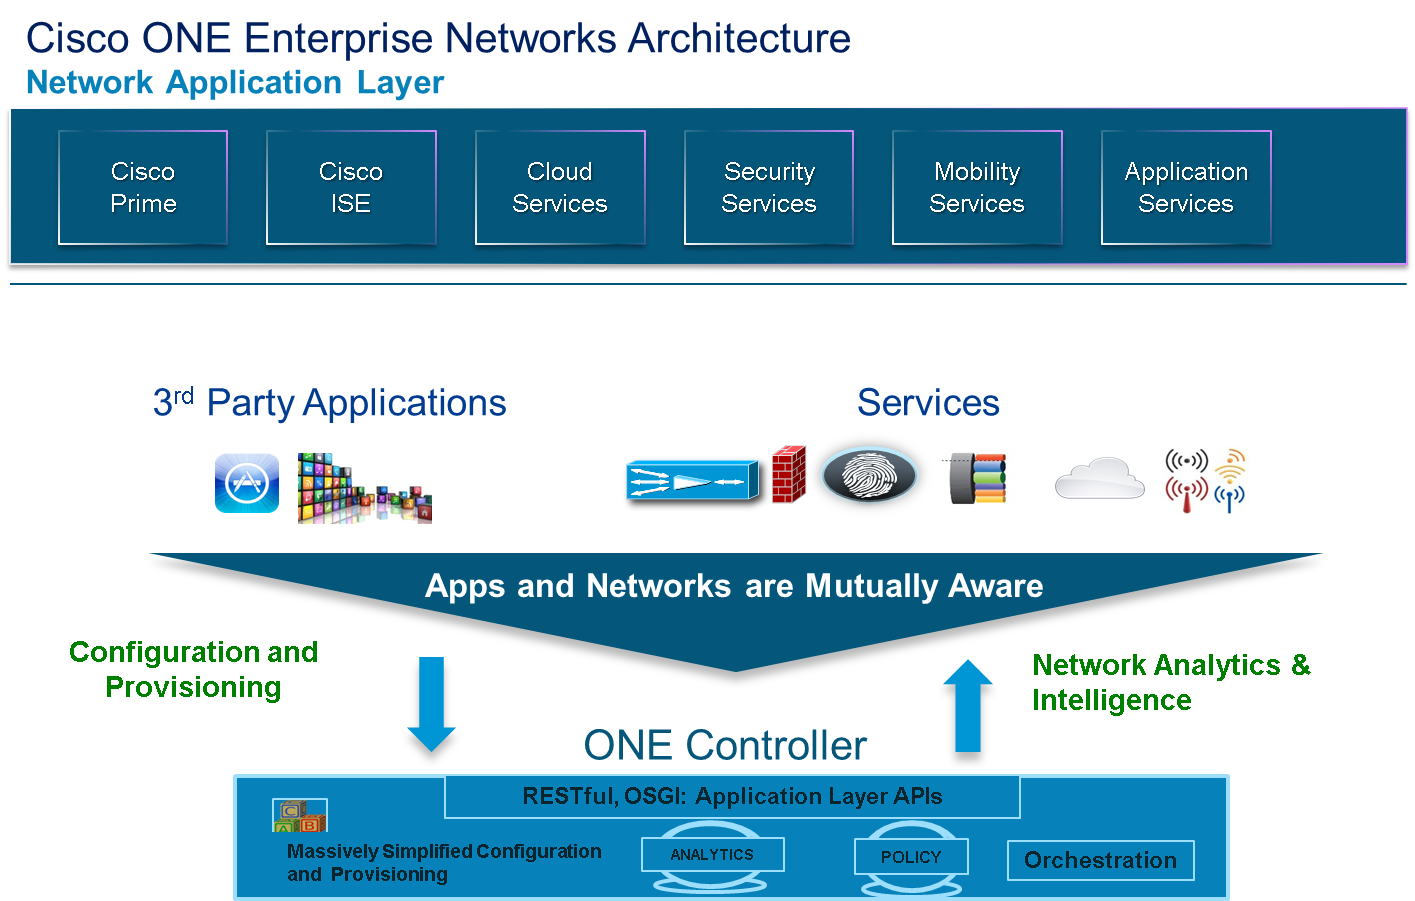 Figure 3: Network Application Layer of Cisco ONE Enterprise Networks Architecture